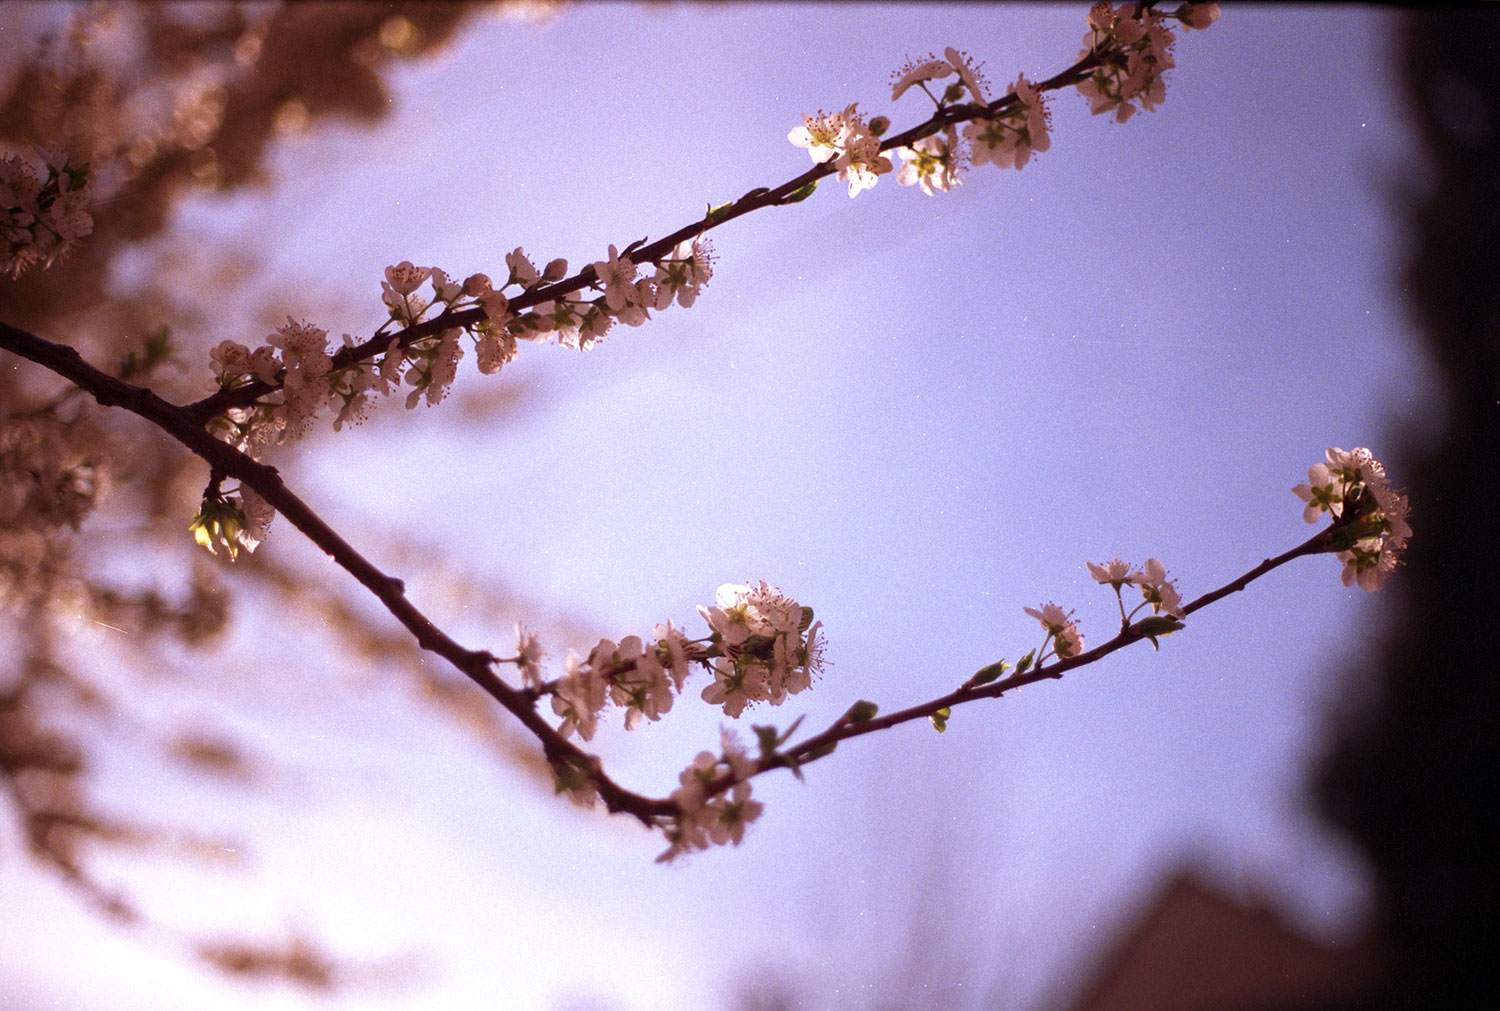 Blossoms against a pinkish sky